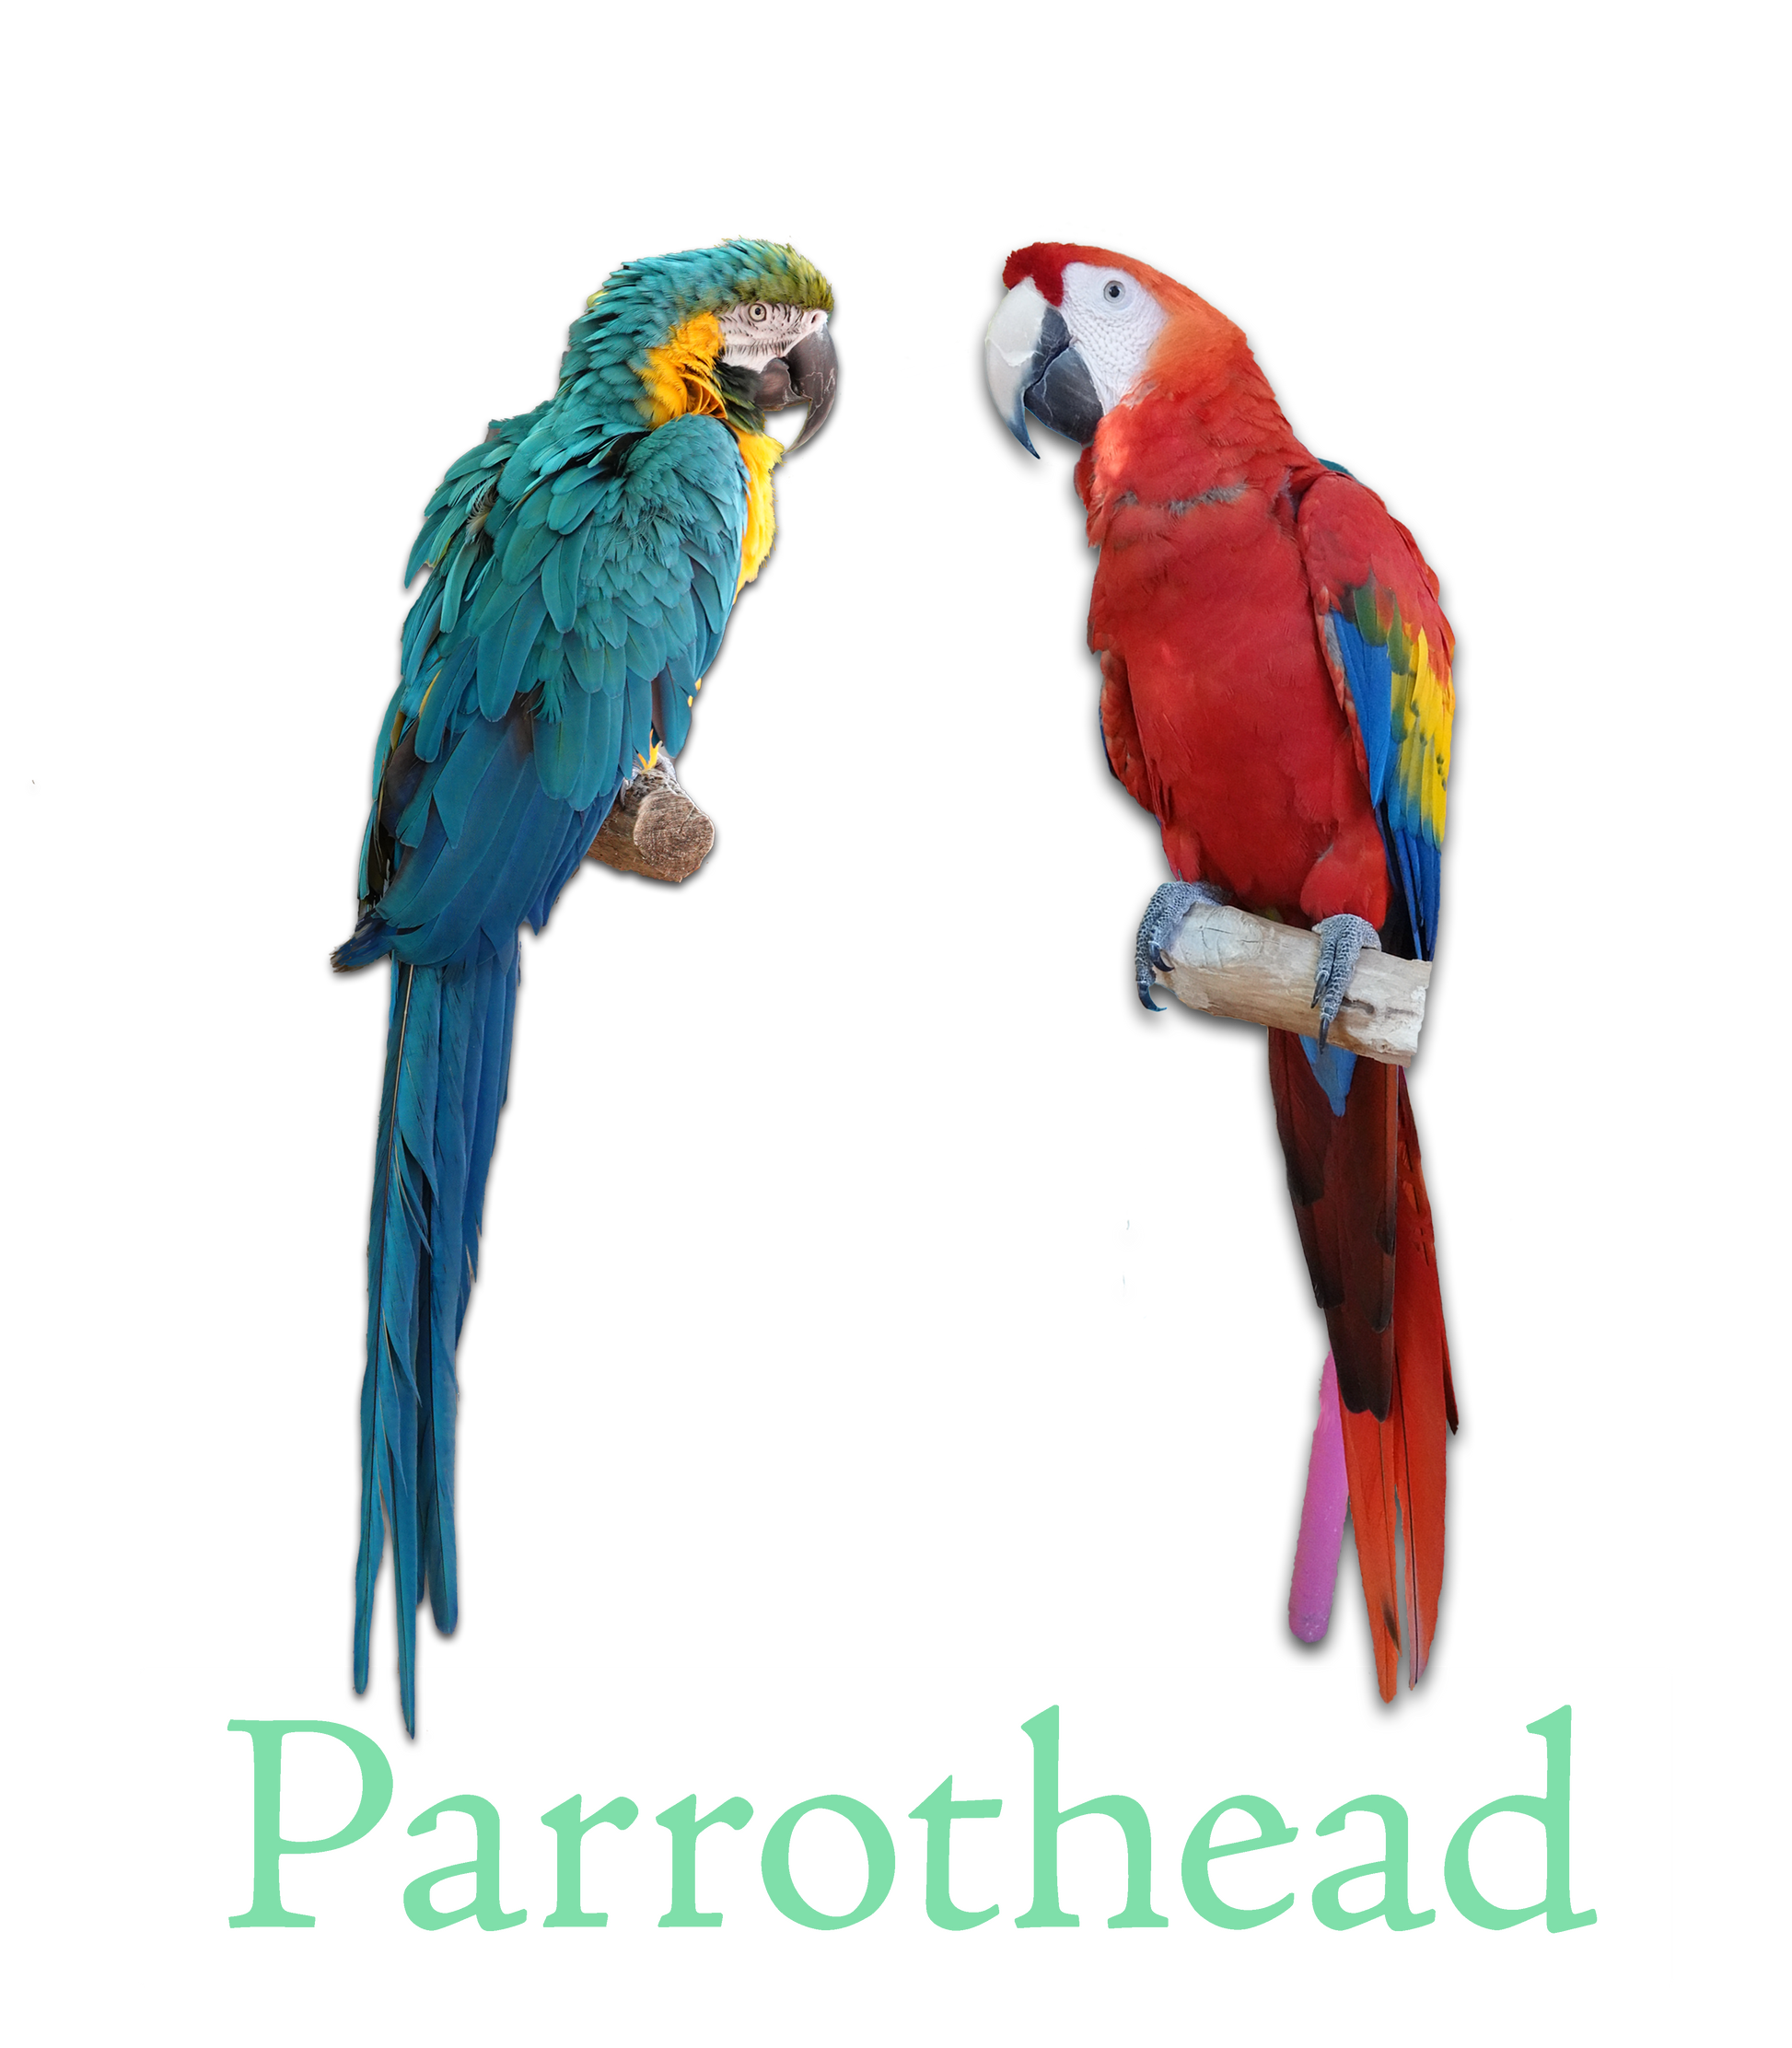 Blue macaw and red macaw facing one another.  "Parrothead" in green pastel text is written  beneath the parrots.